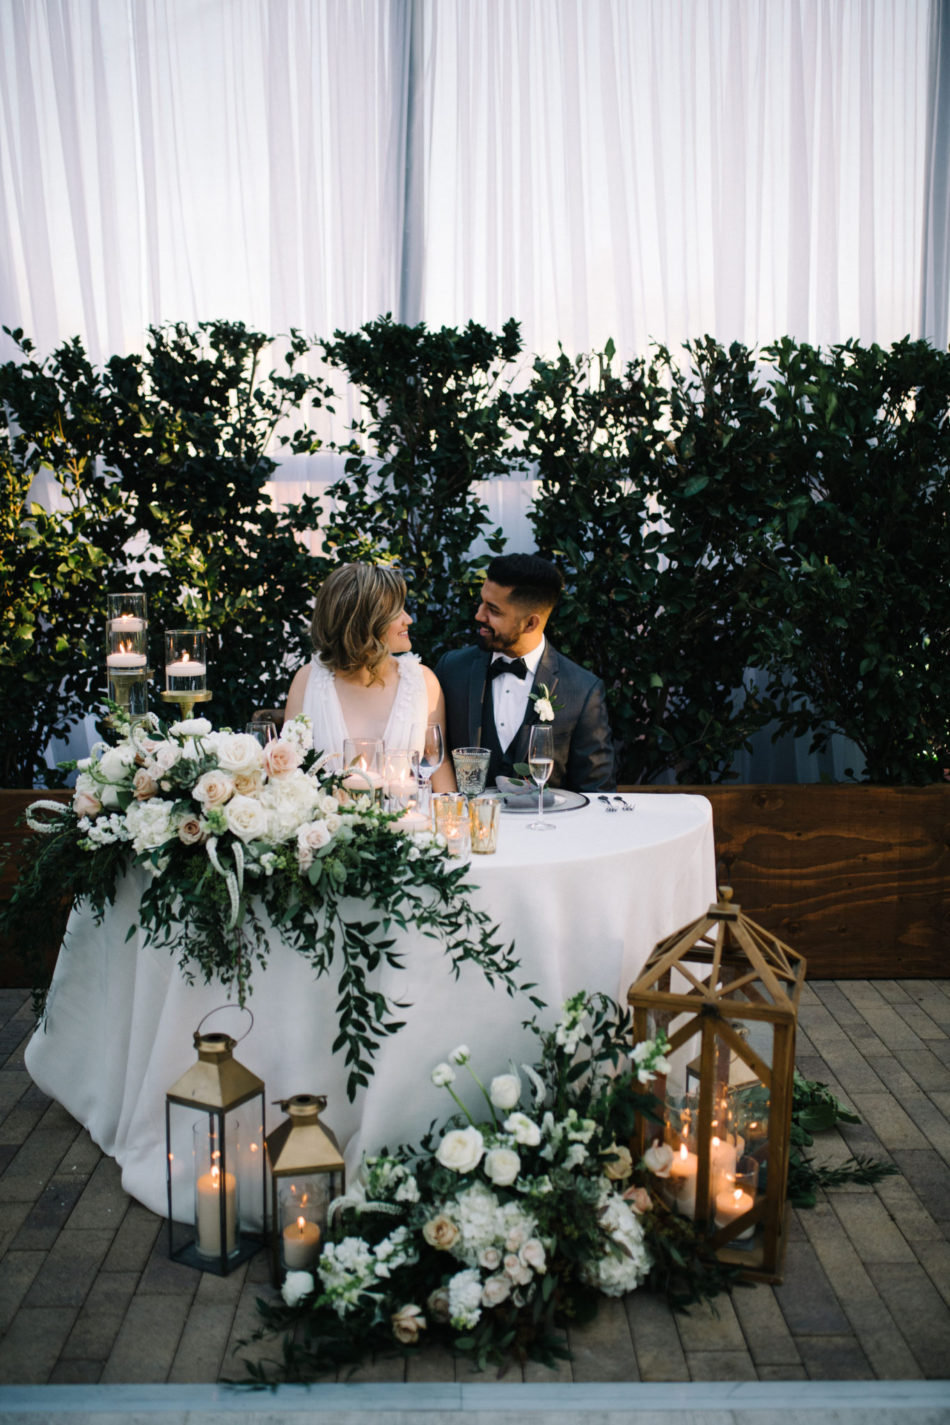 floral design, florist, wedding florist, wedding flowers, orange county weddings, orange county wedding florist, orange county florist, orange county floral design, flowers by cina, sweetheart table, bride and groom, white blooms